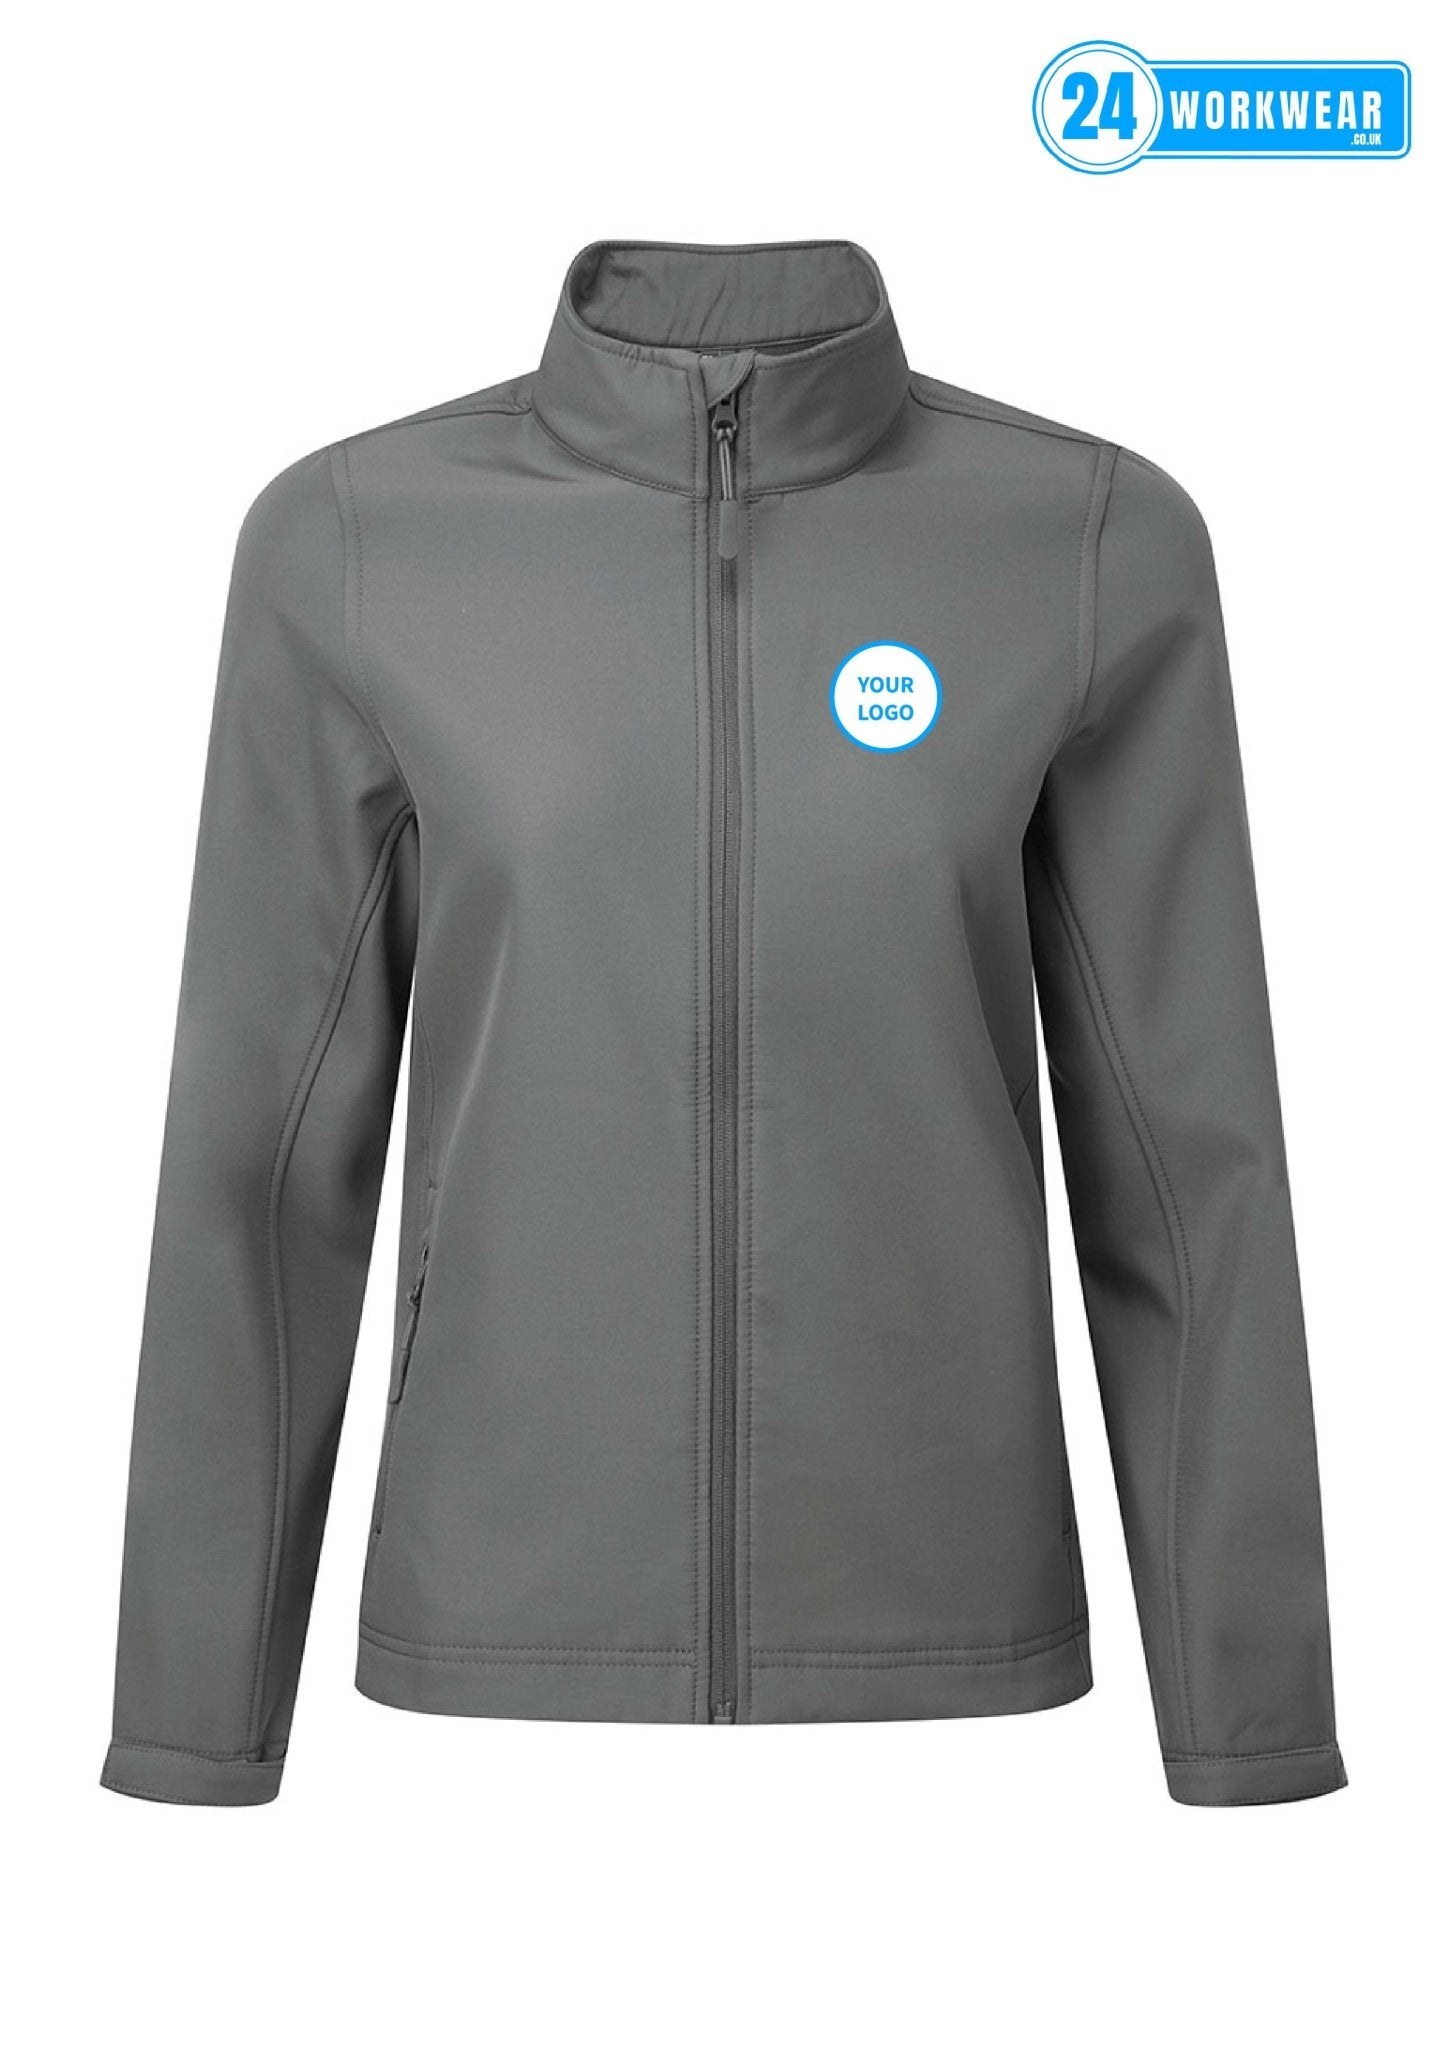 Premier Ladies Windchecker® Printable and Recycled Soft Shell Jacket - 24 Workwear - Soft Shell